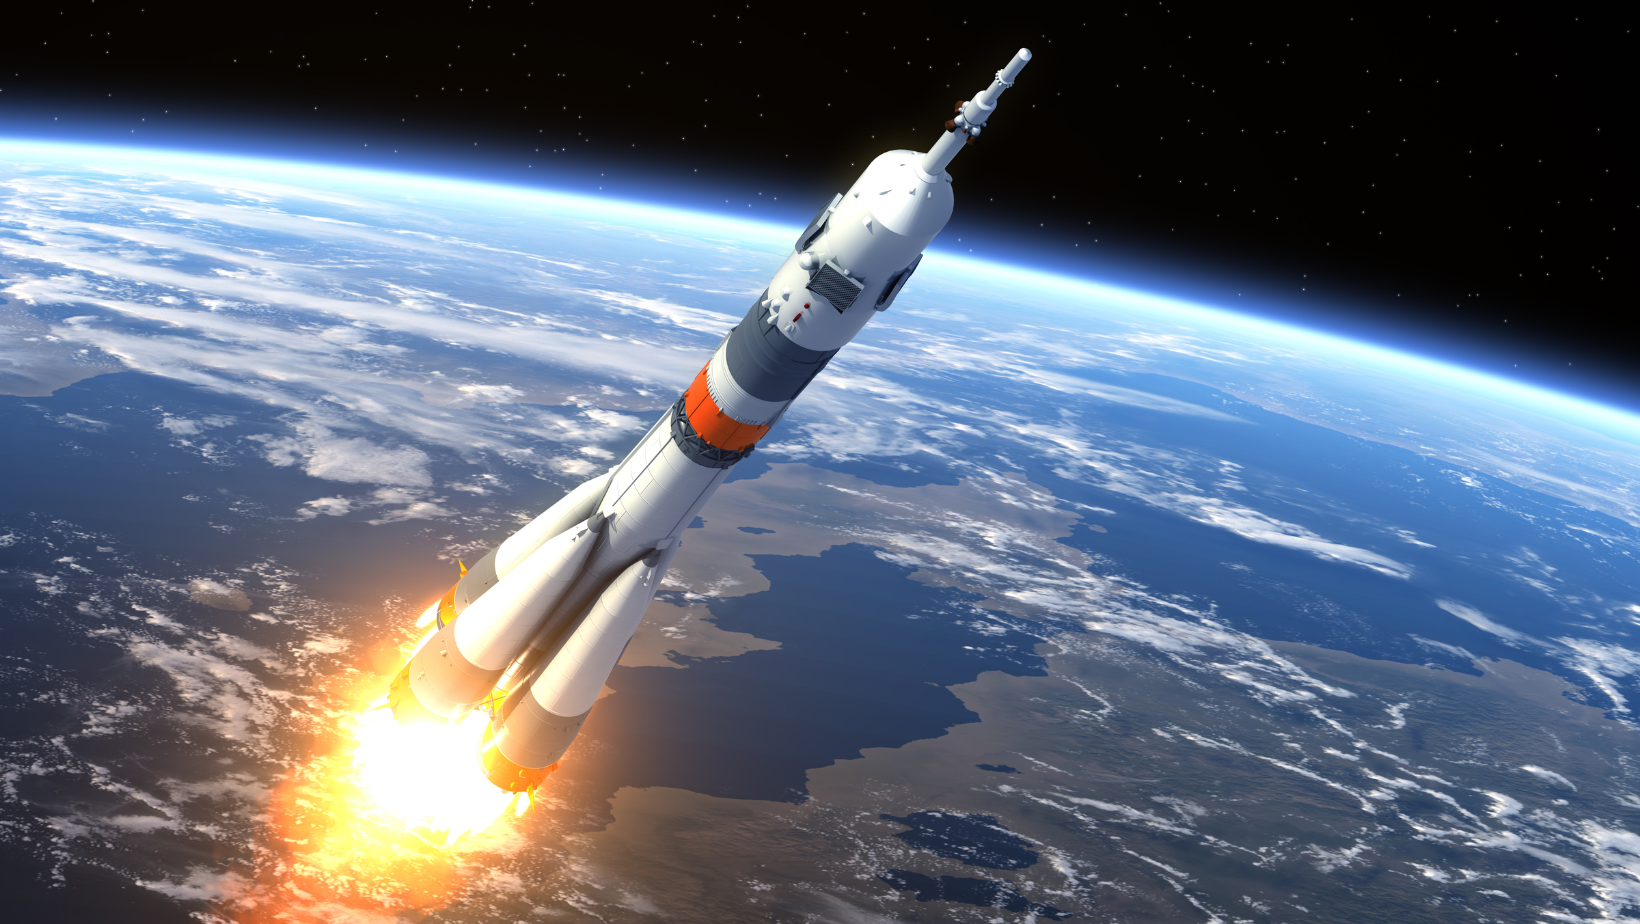 Rocket is launched into outer space with the earth behind it.